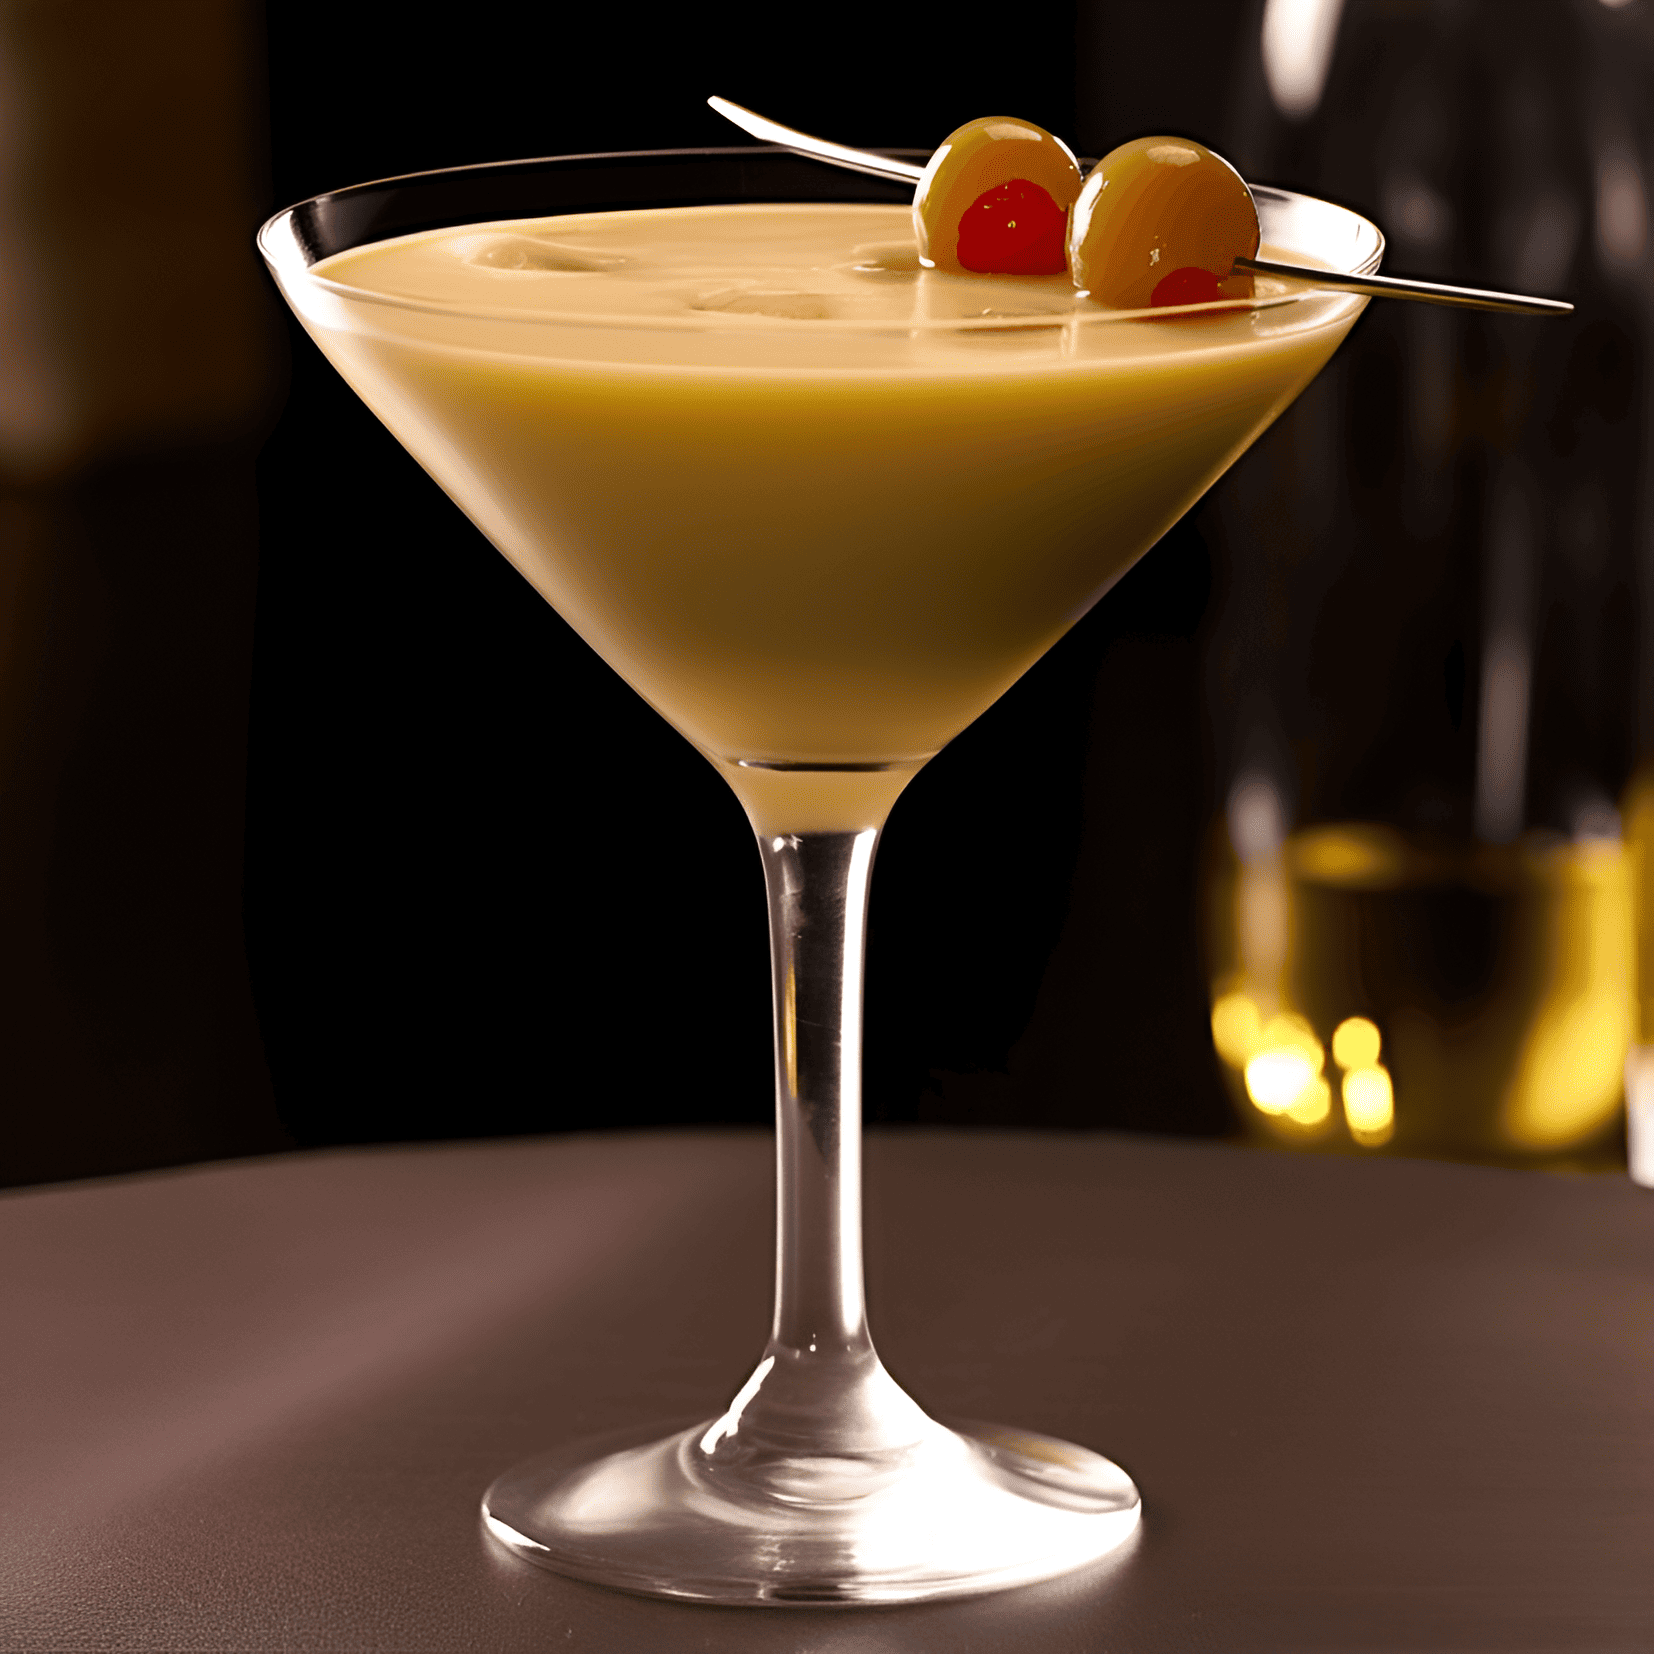 Golden Cadillac Cocktail Recipe - The Golden Cadillac has a rich, creamy, and velvety texture with a perfect balance of sweet and bitter flavors. The combination of Galliano, white crème de cacao, and heavy cream creates a decadent and indulgent taste, reminiscent of a luxurious dessert.